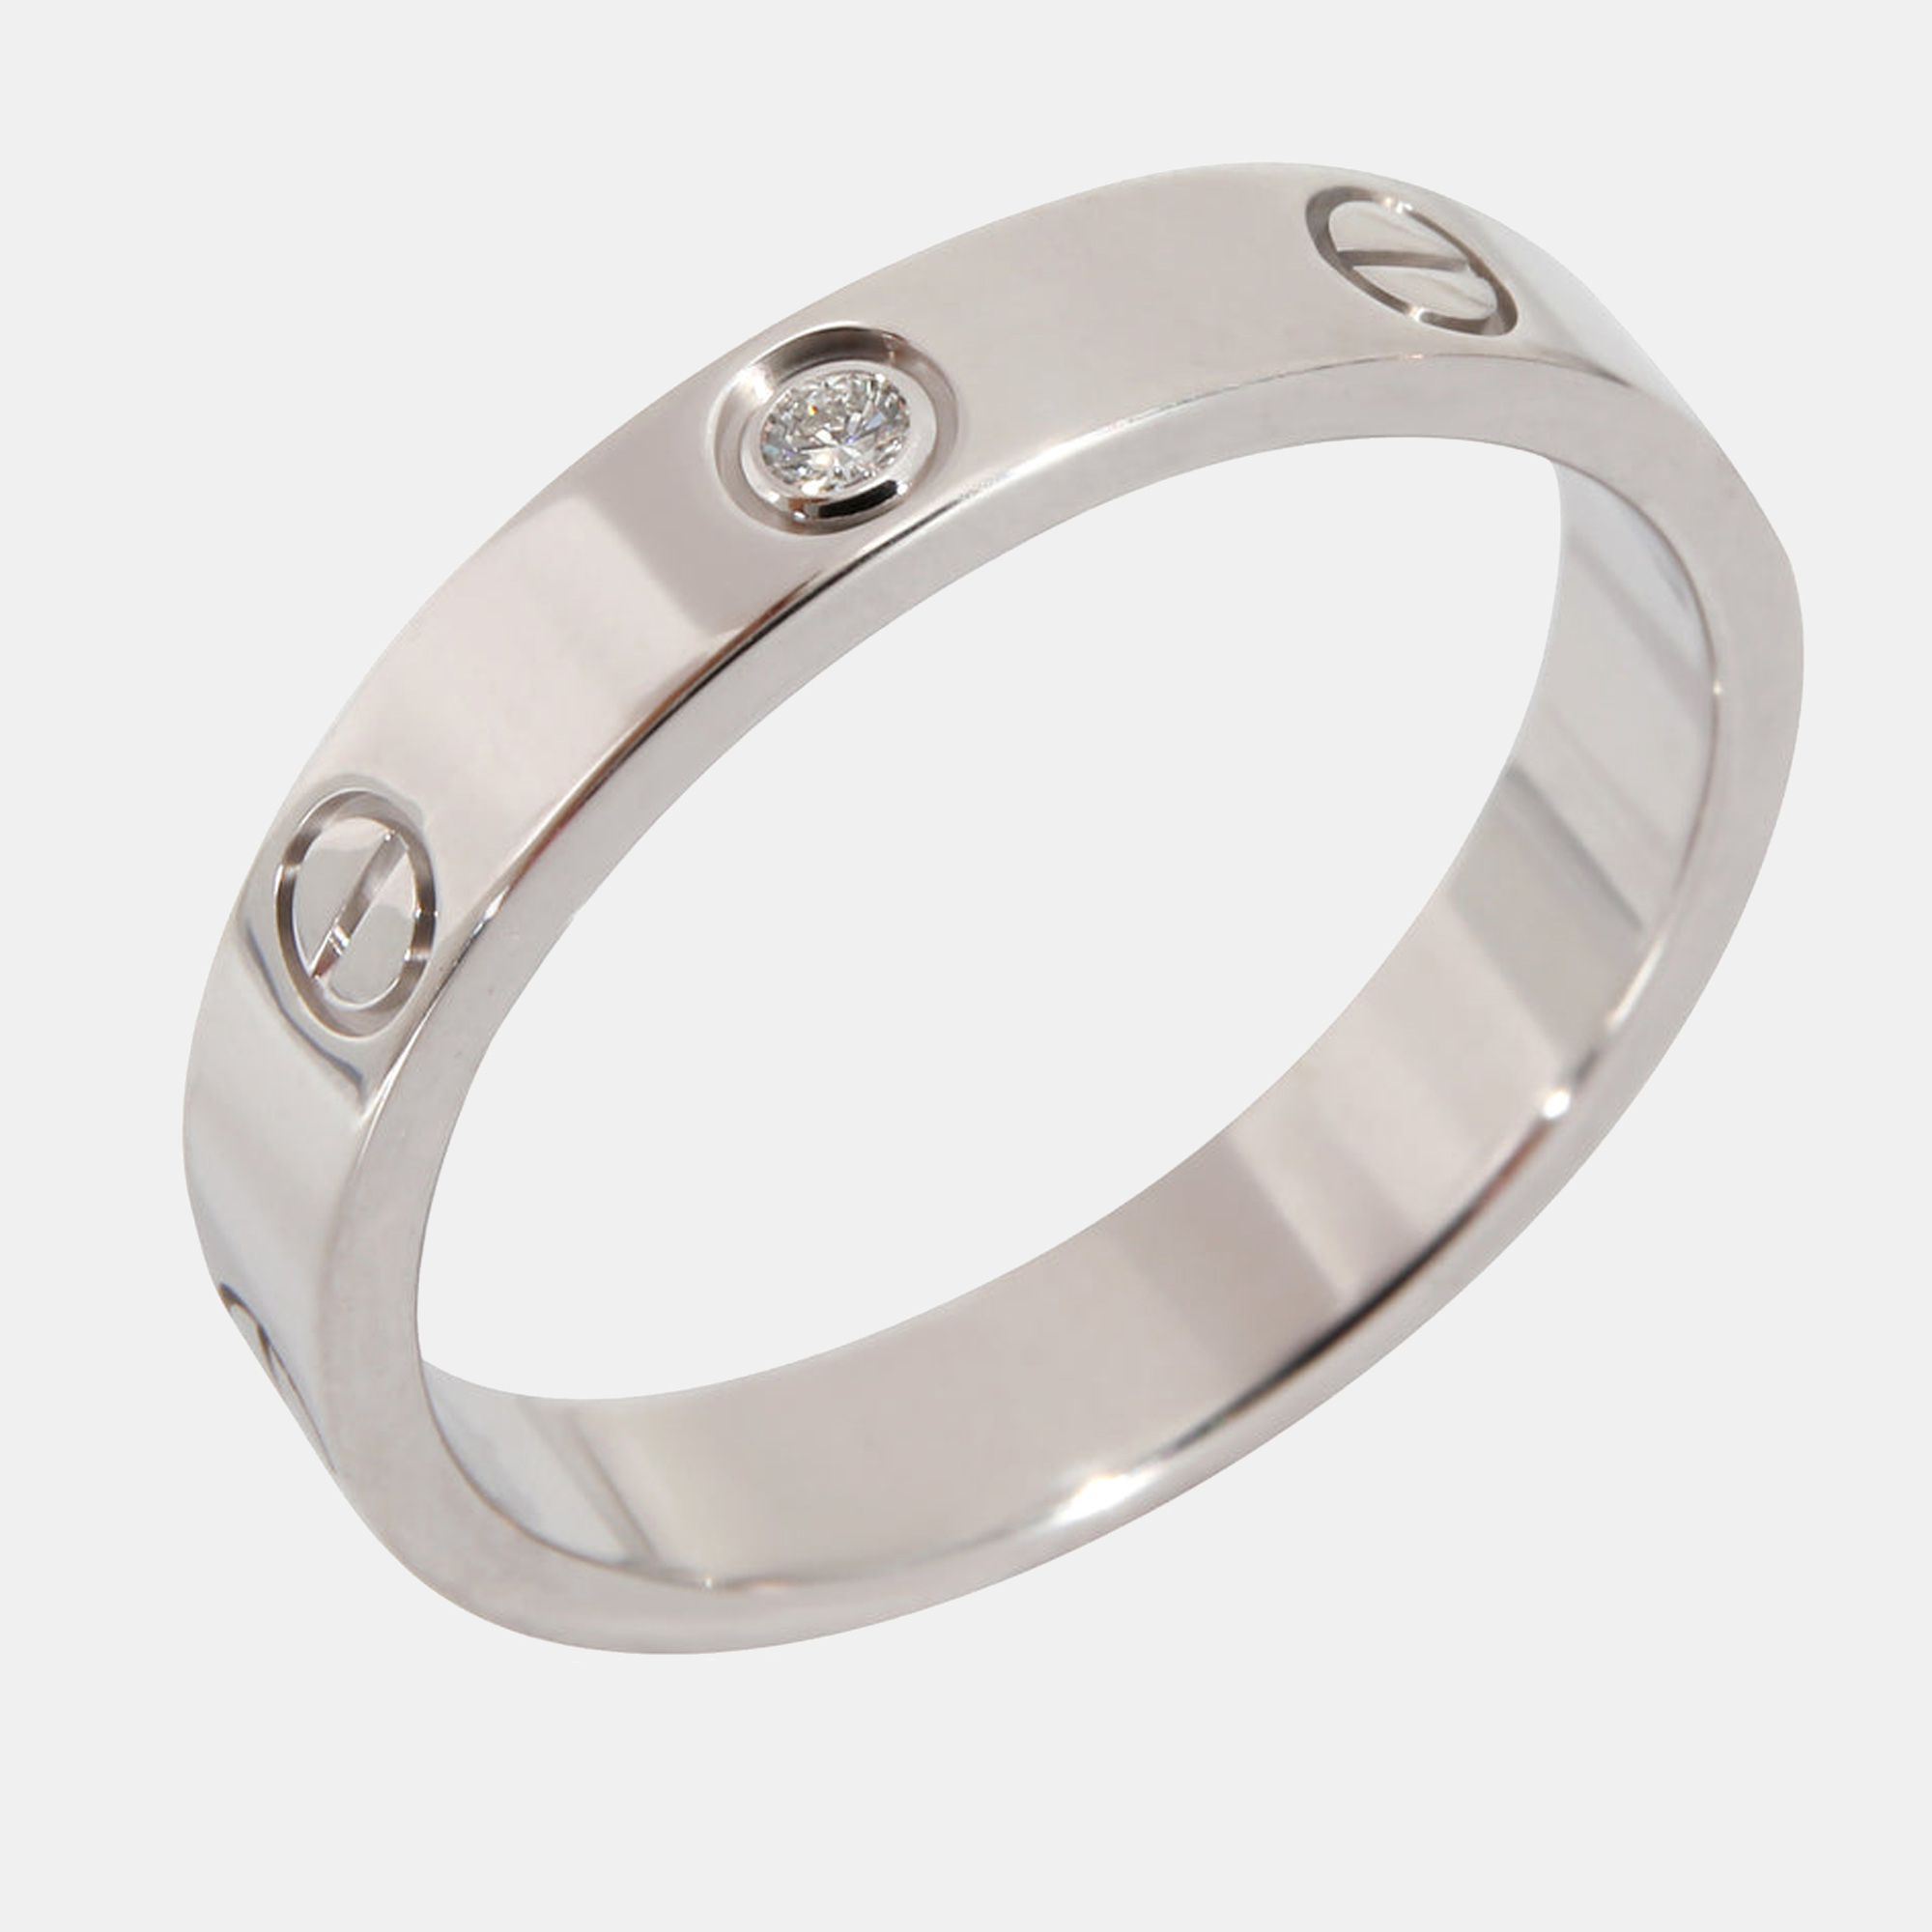 Cartier Love Band In 18K White Gold 0.02 CTW Ring EU 58